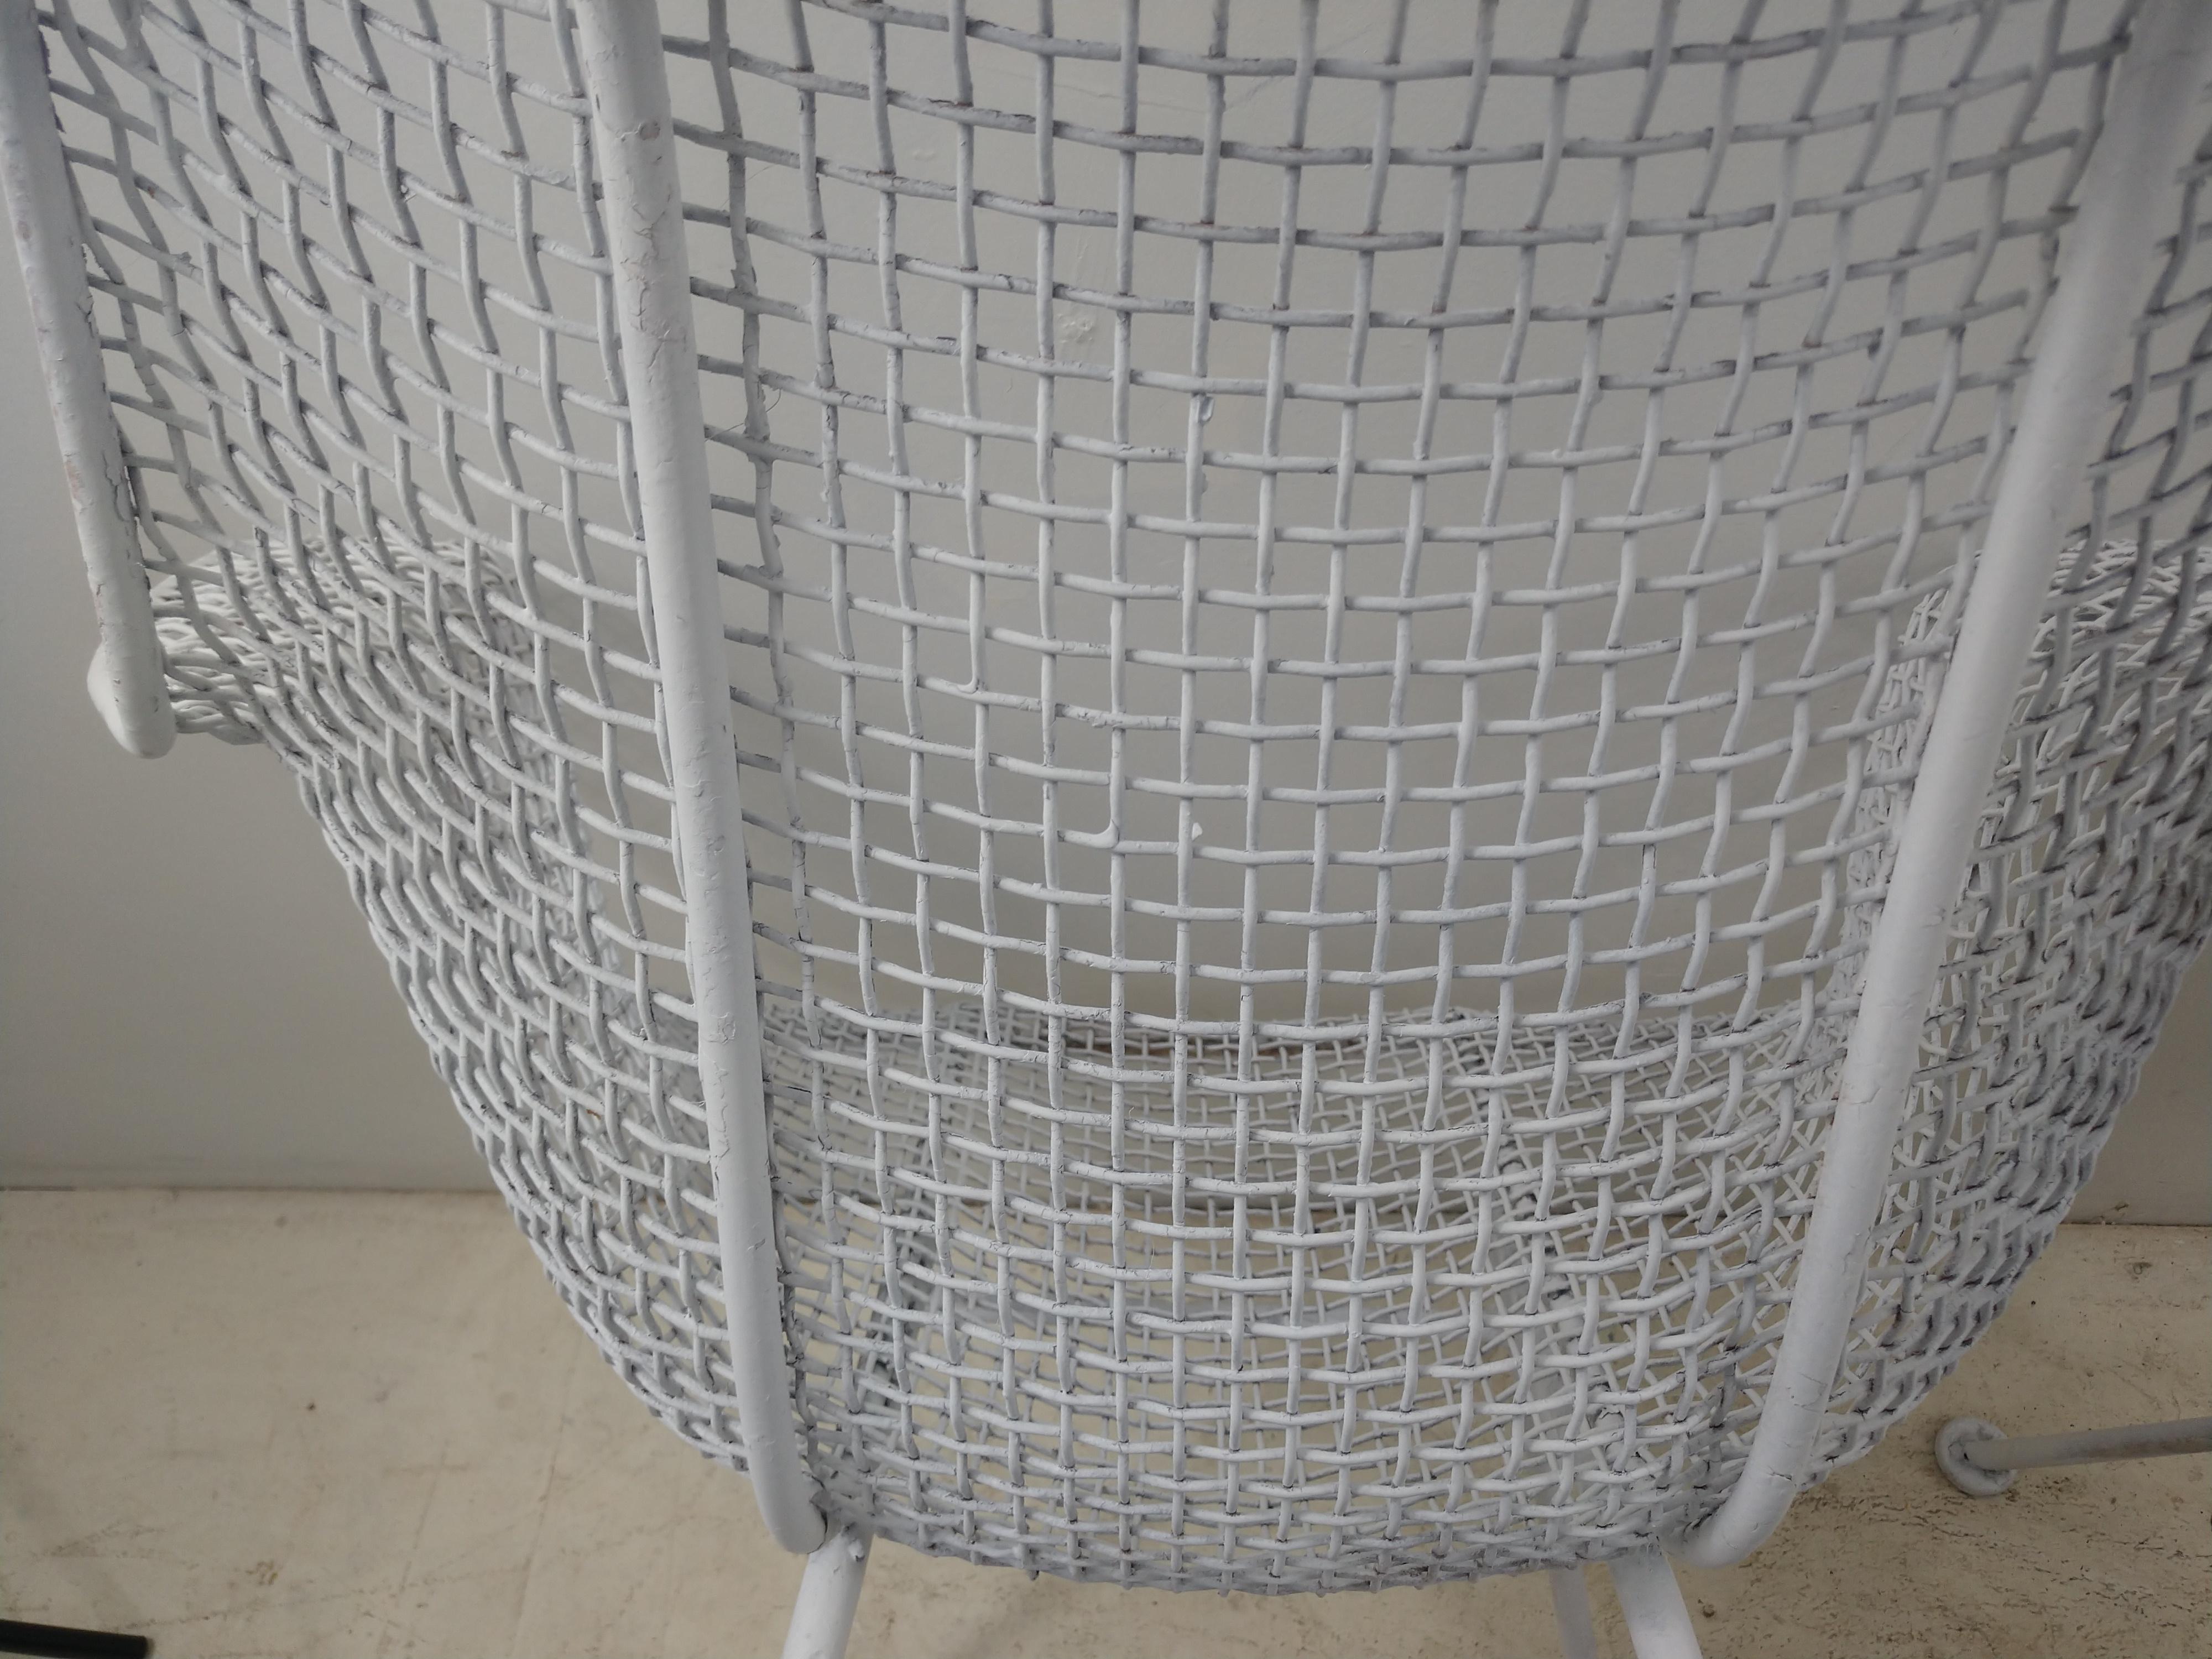 Pair of iconic outdoor armchairs by Russell Woodard, sculptural. Created and designed in the 1950s these chairs have remained in vogue for over half a century. Chairs were recently sprayed white. Seat height is 16.5. Molded wire mesh in a tight